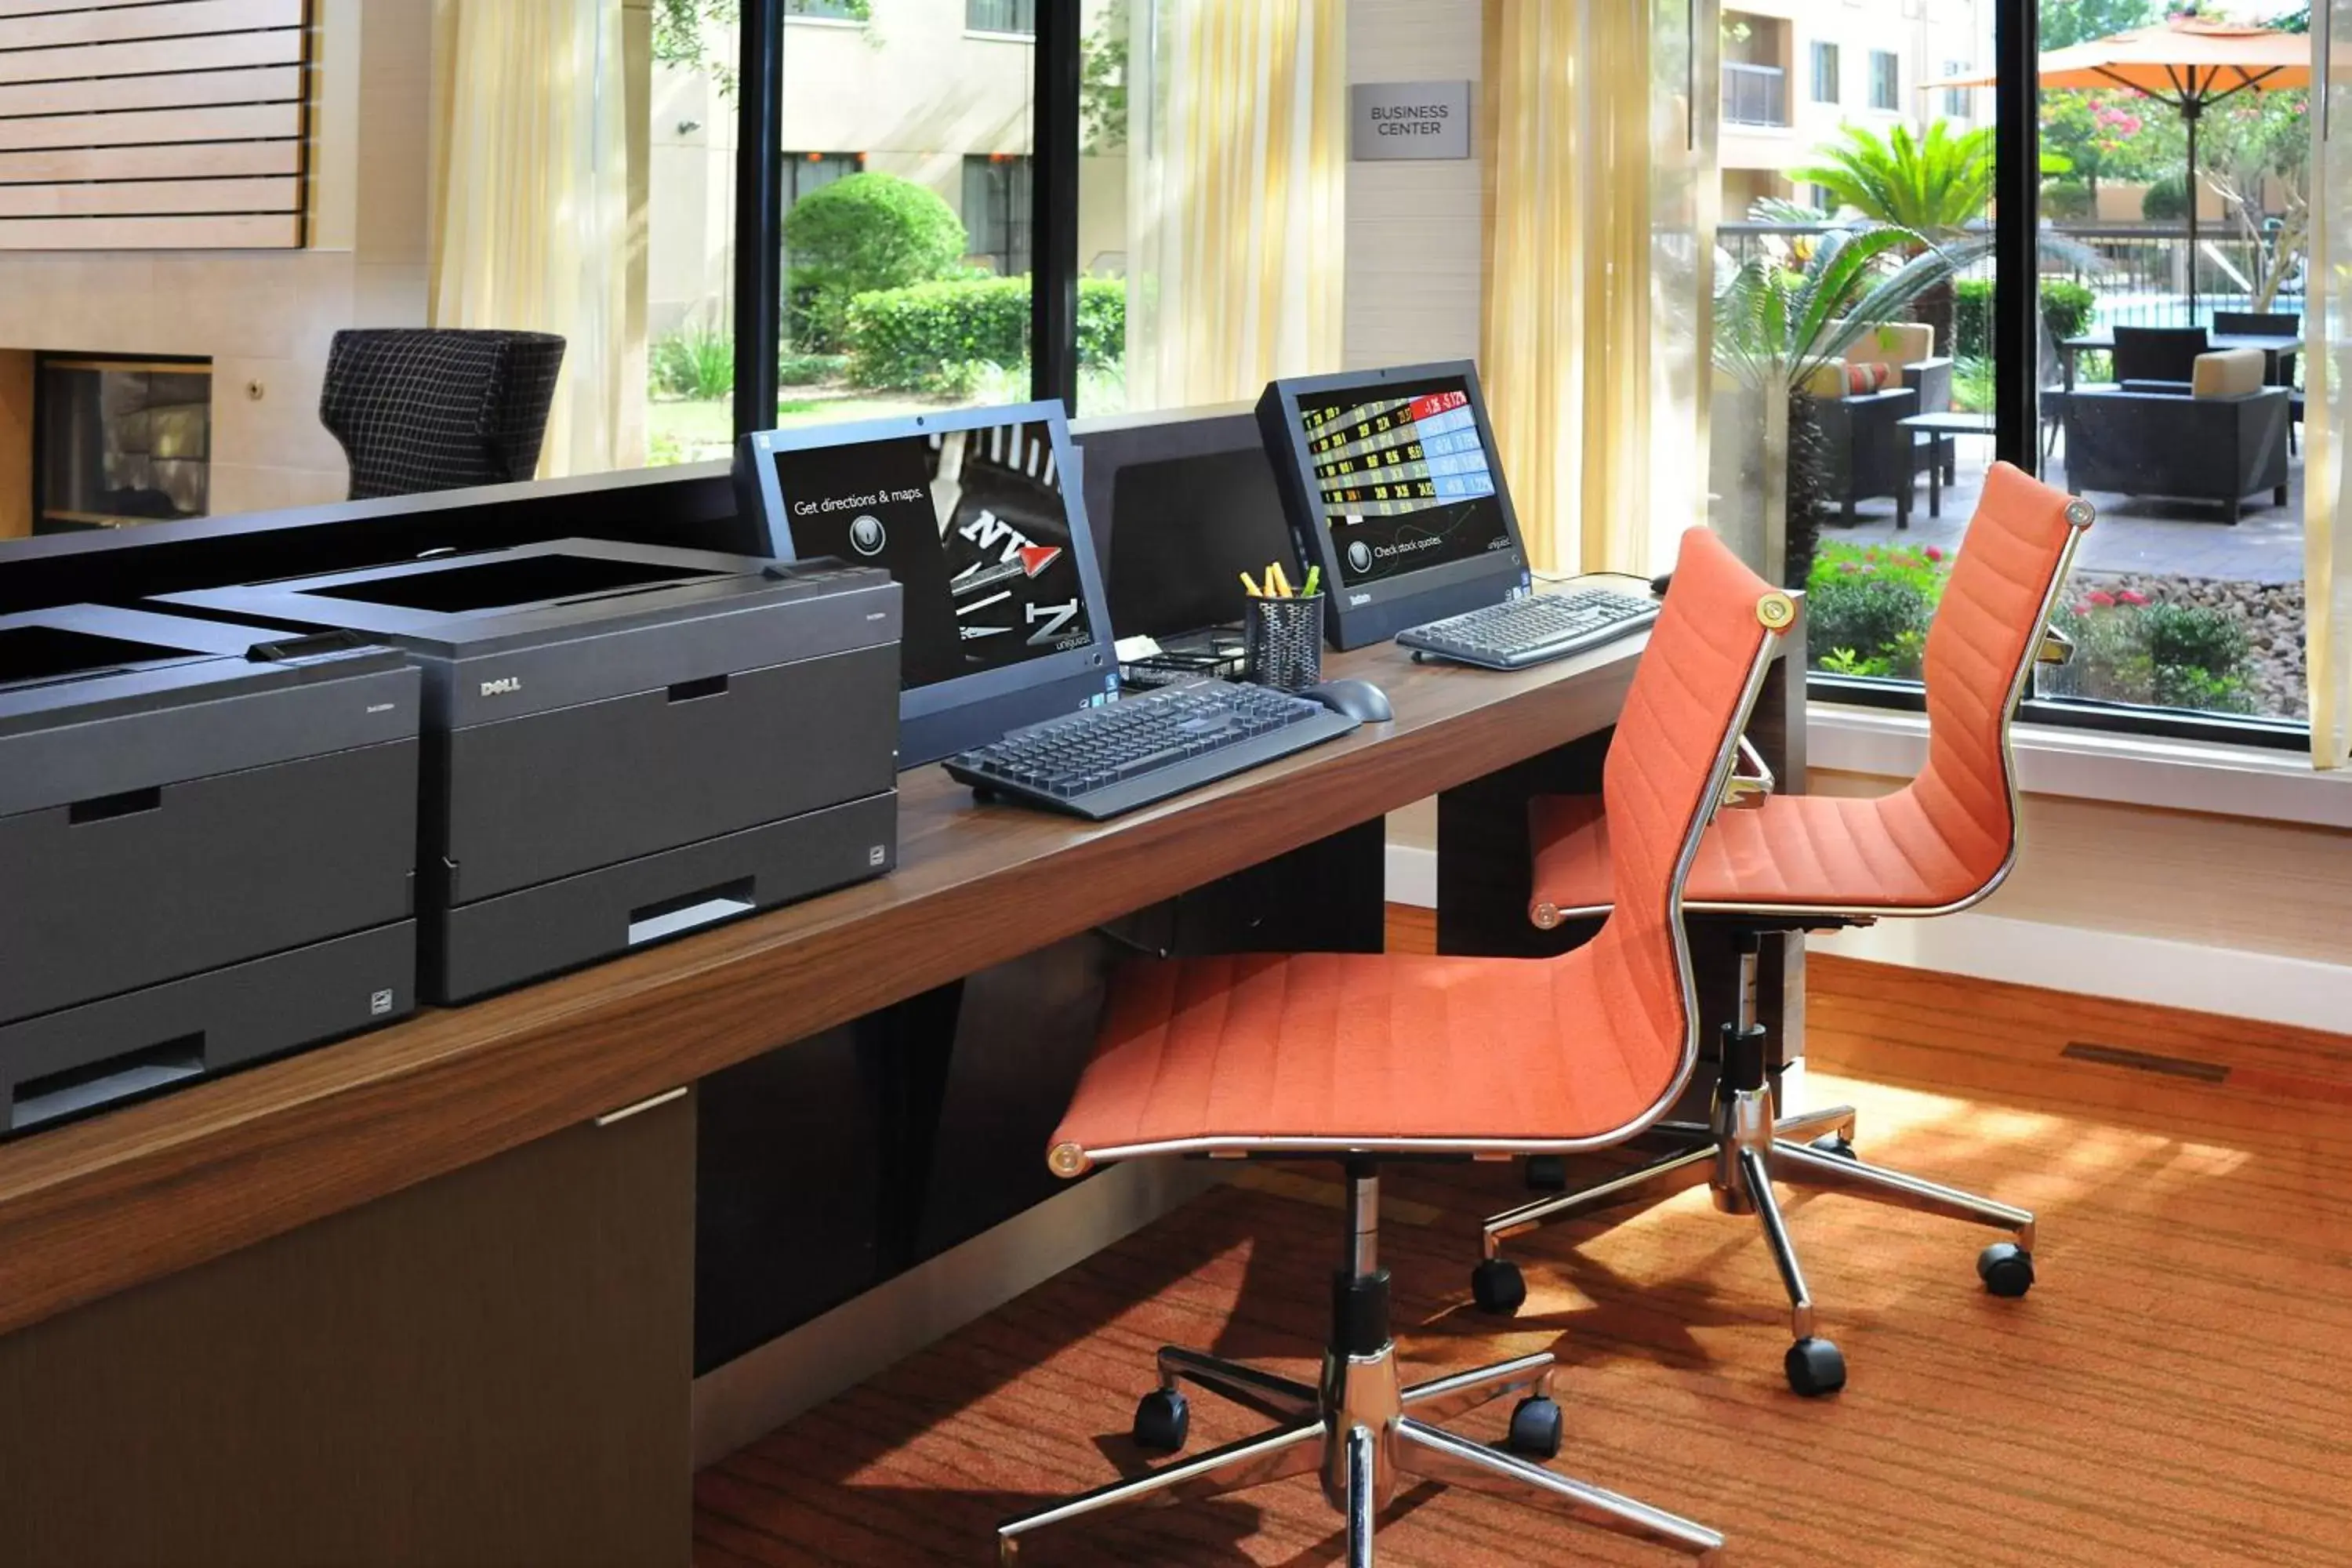 Business facilities in Courtyard by Marriott Houston Hobby Airport